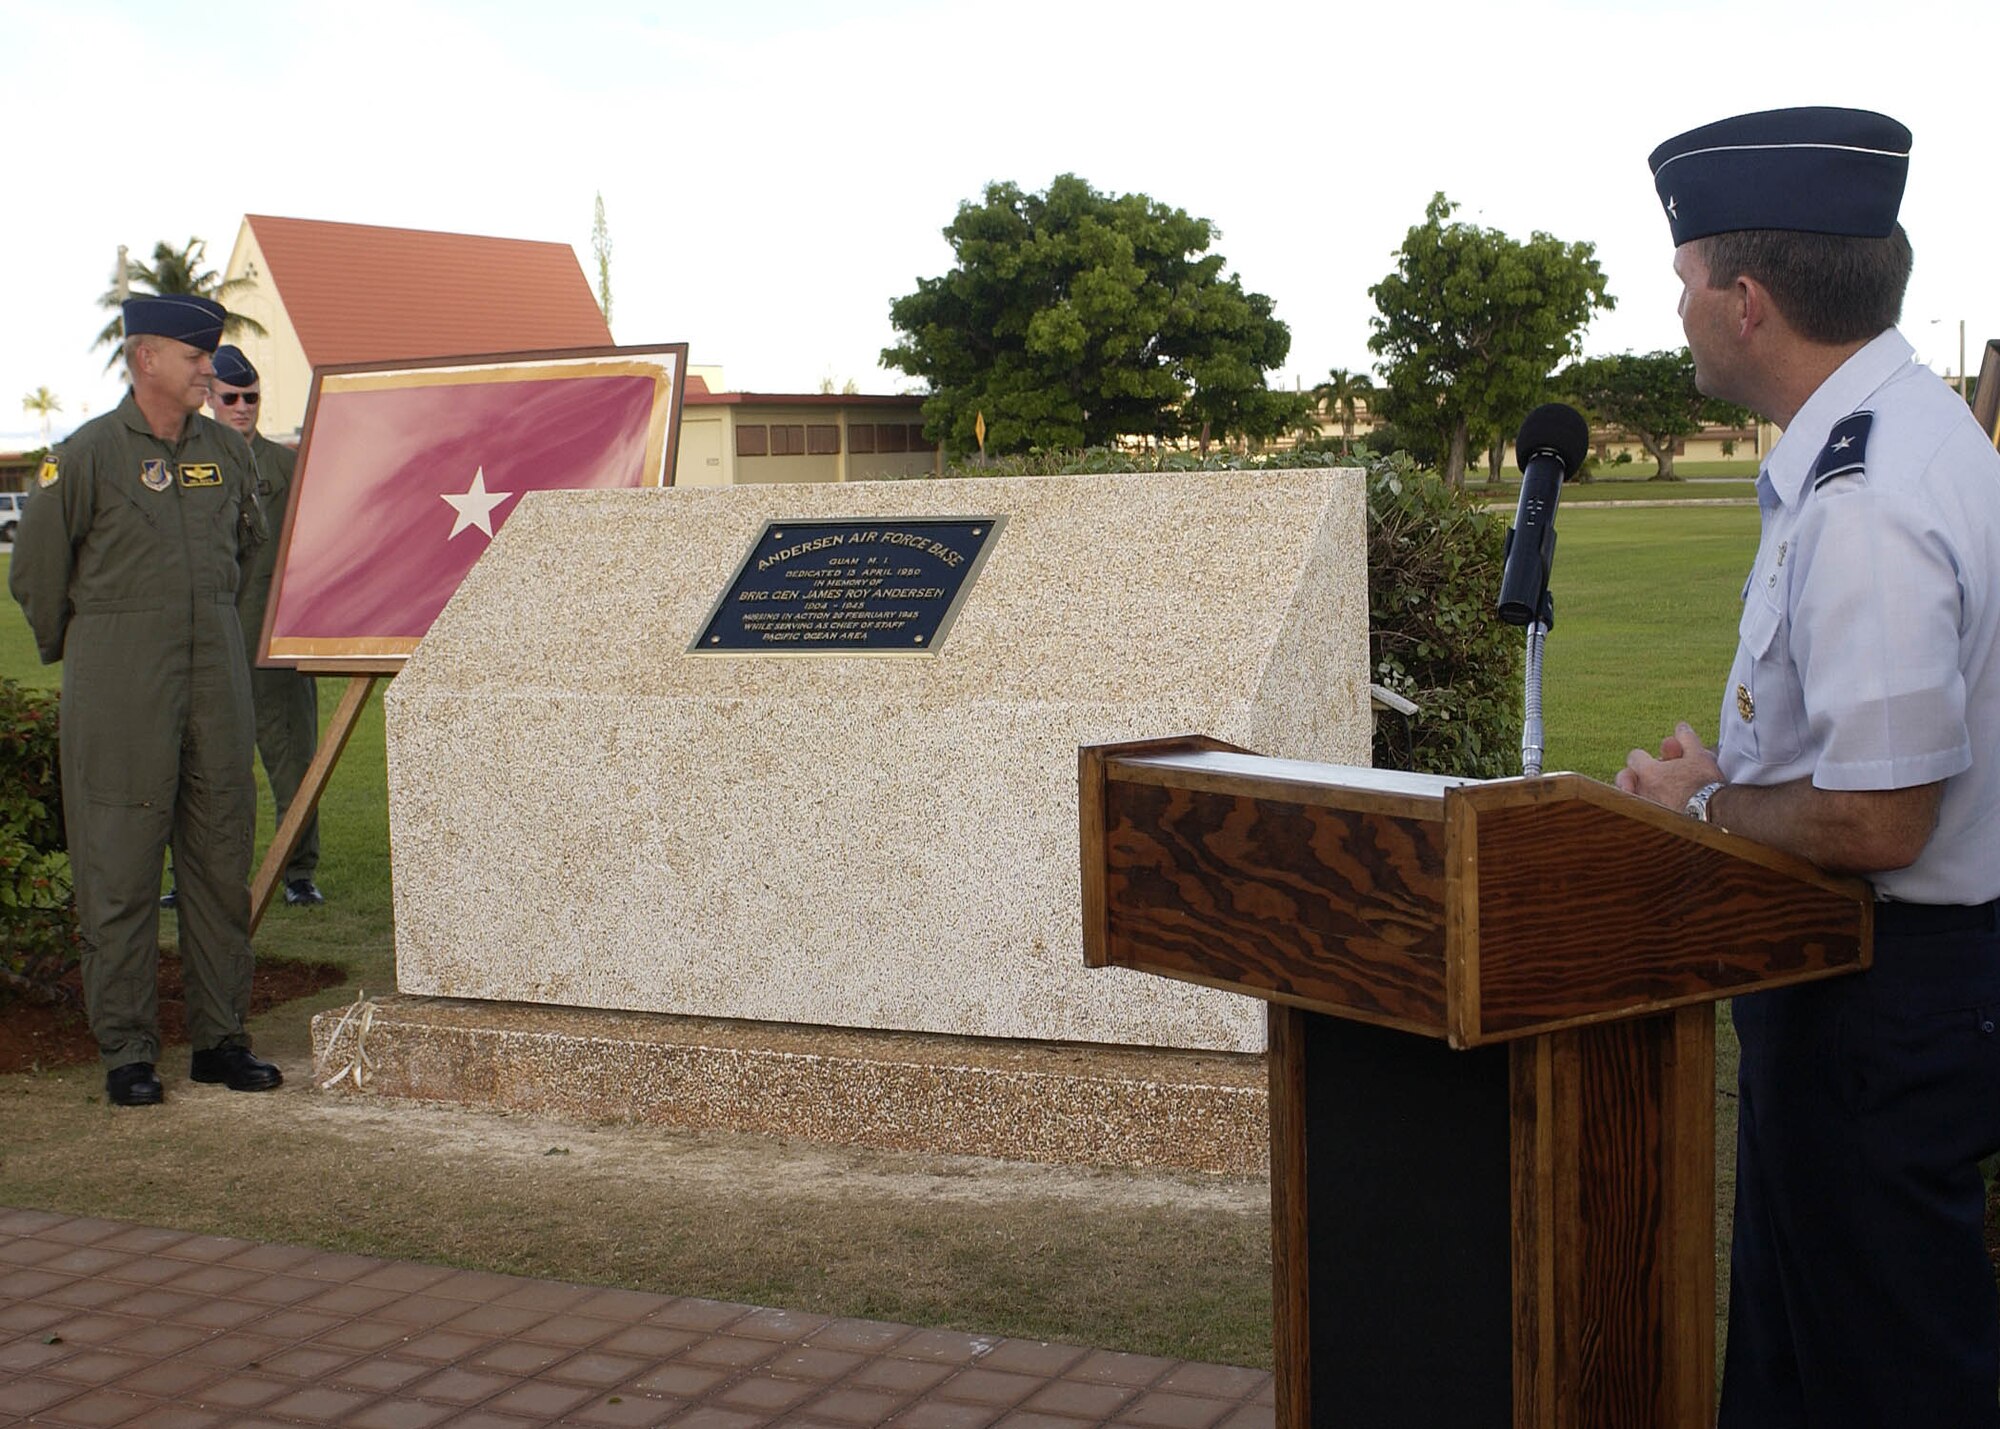 ANDERSEN AIR FORCE BASE, Guam - Brig. Gen. Doug Owens, 36th Wing commander, was the guest speaker at Andersen's plaque rededication ceremony held at 4:45 p.m. today at the 36th WG Headquarters Building.  The base held the rededication ceremony to unveil the original plaque that named Andersen after its namesake Brig. Gen. Roy Andersen.  General Andersen was a former chief of staff of the Army Air Forces in the Pacific who died in an aircraft accident over the Pacific Ocean in 1945.  The plaque was originally dedicated in 1949 when North Field was renamed Andersen Air Force Base. The event was one of many held during Guam's Air Force Week to honor the Air Force's 60th Anniversary. (Photo by Senior Airman Sonya Padilla/ 36th Wing Public Affairs)